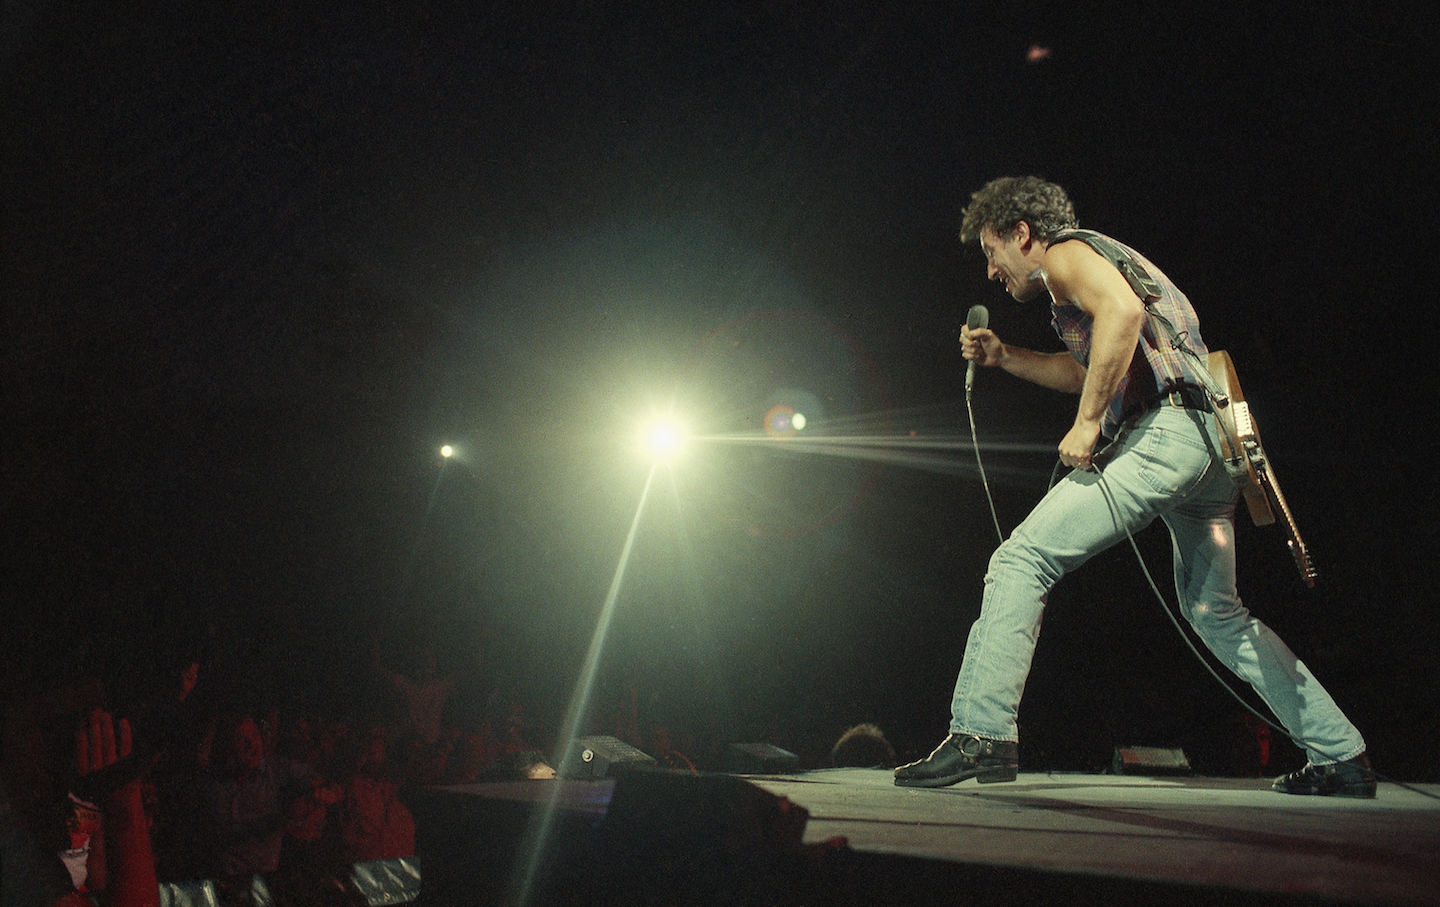 The Queerness of Bruce Springsteen